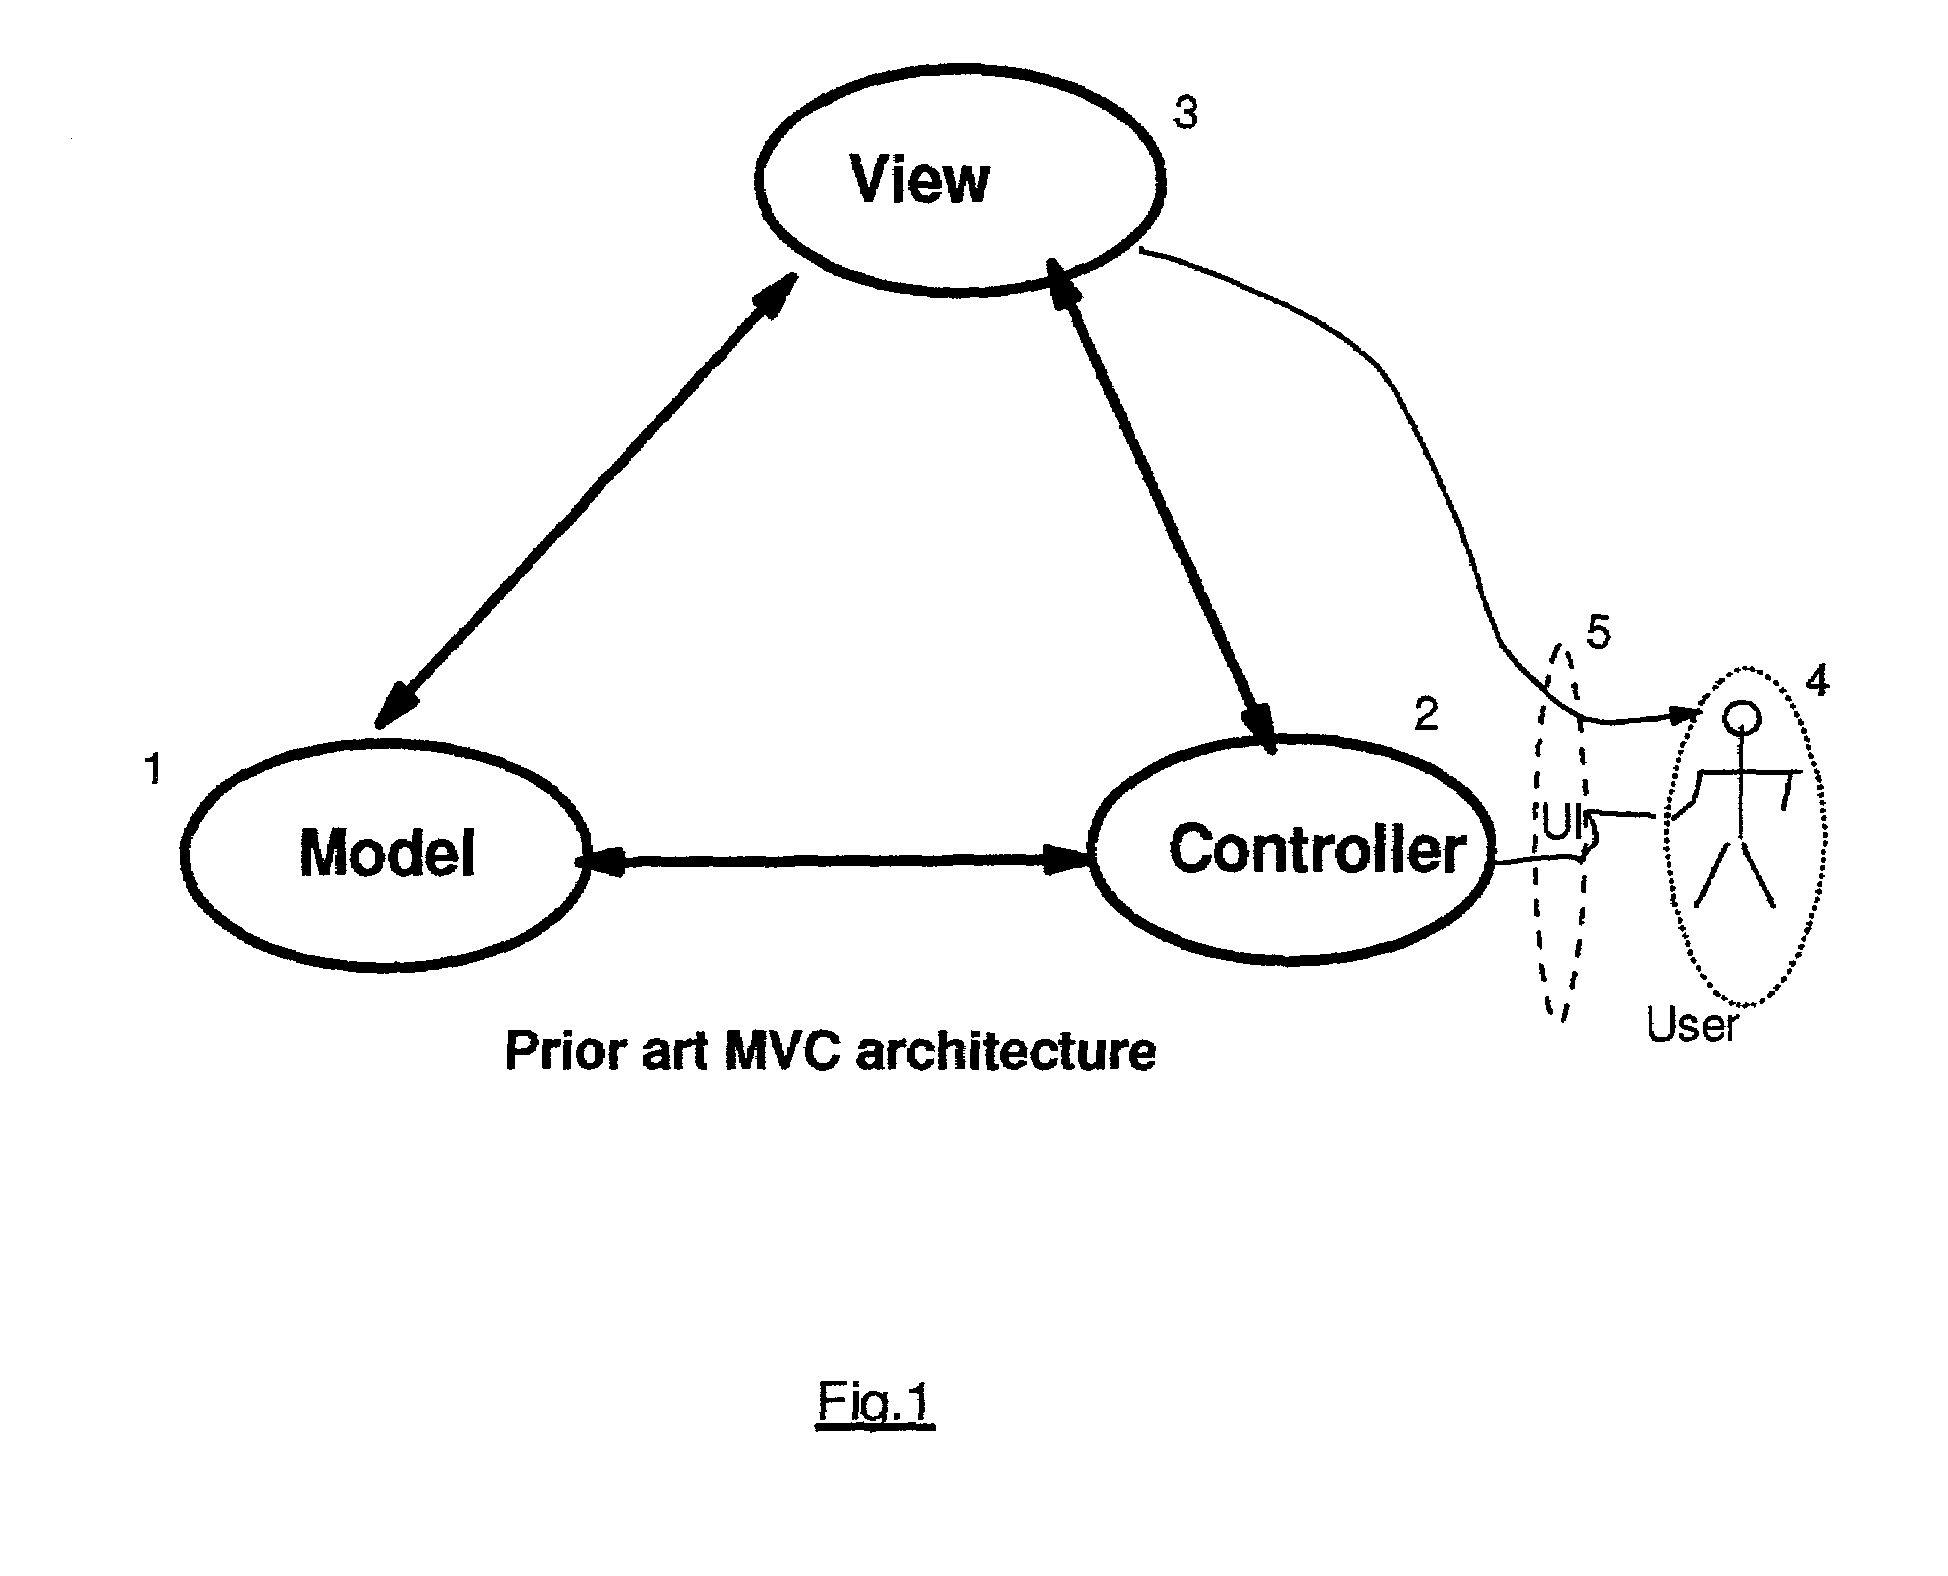 Method, system and program product in a model-view-controller (MVC) programming architecture for inter-object communication with transformation